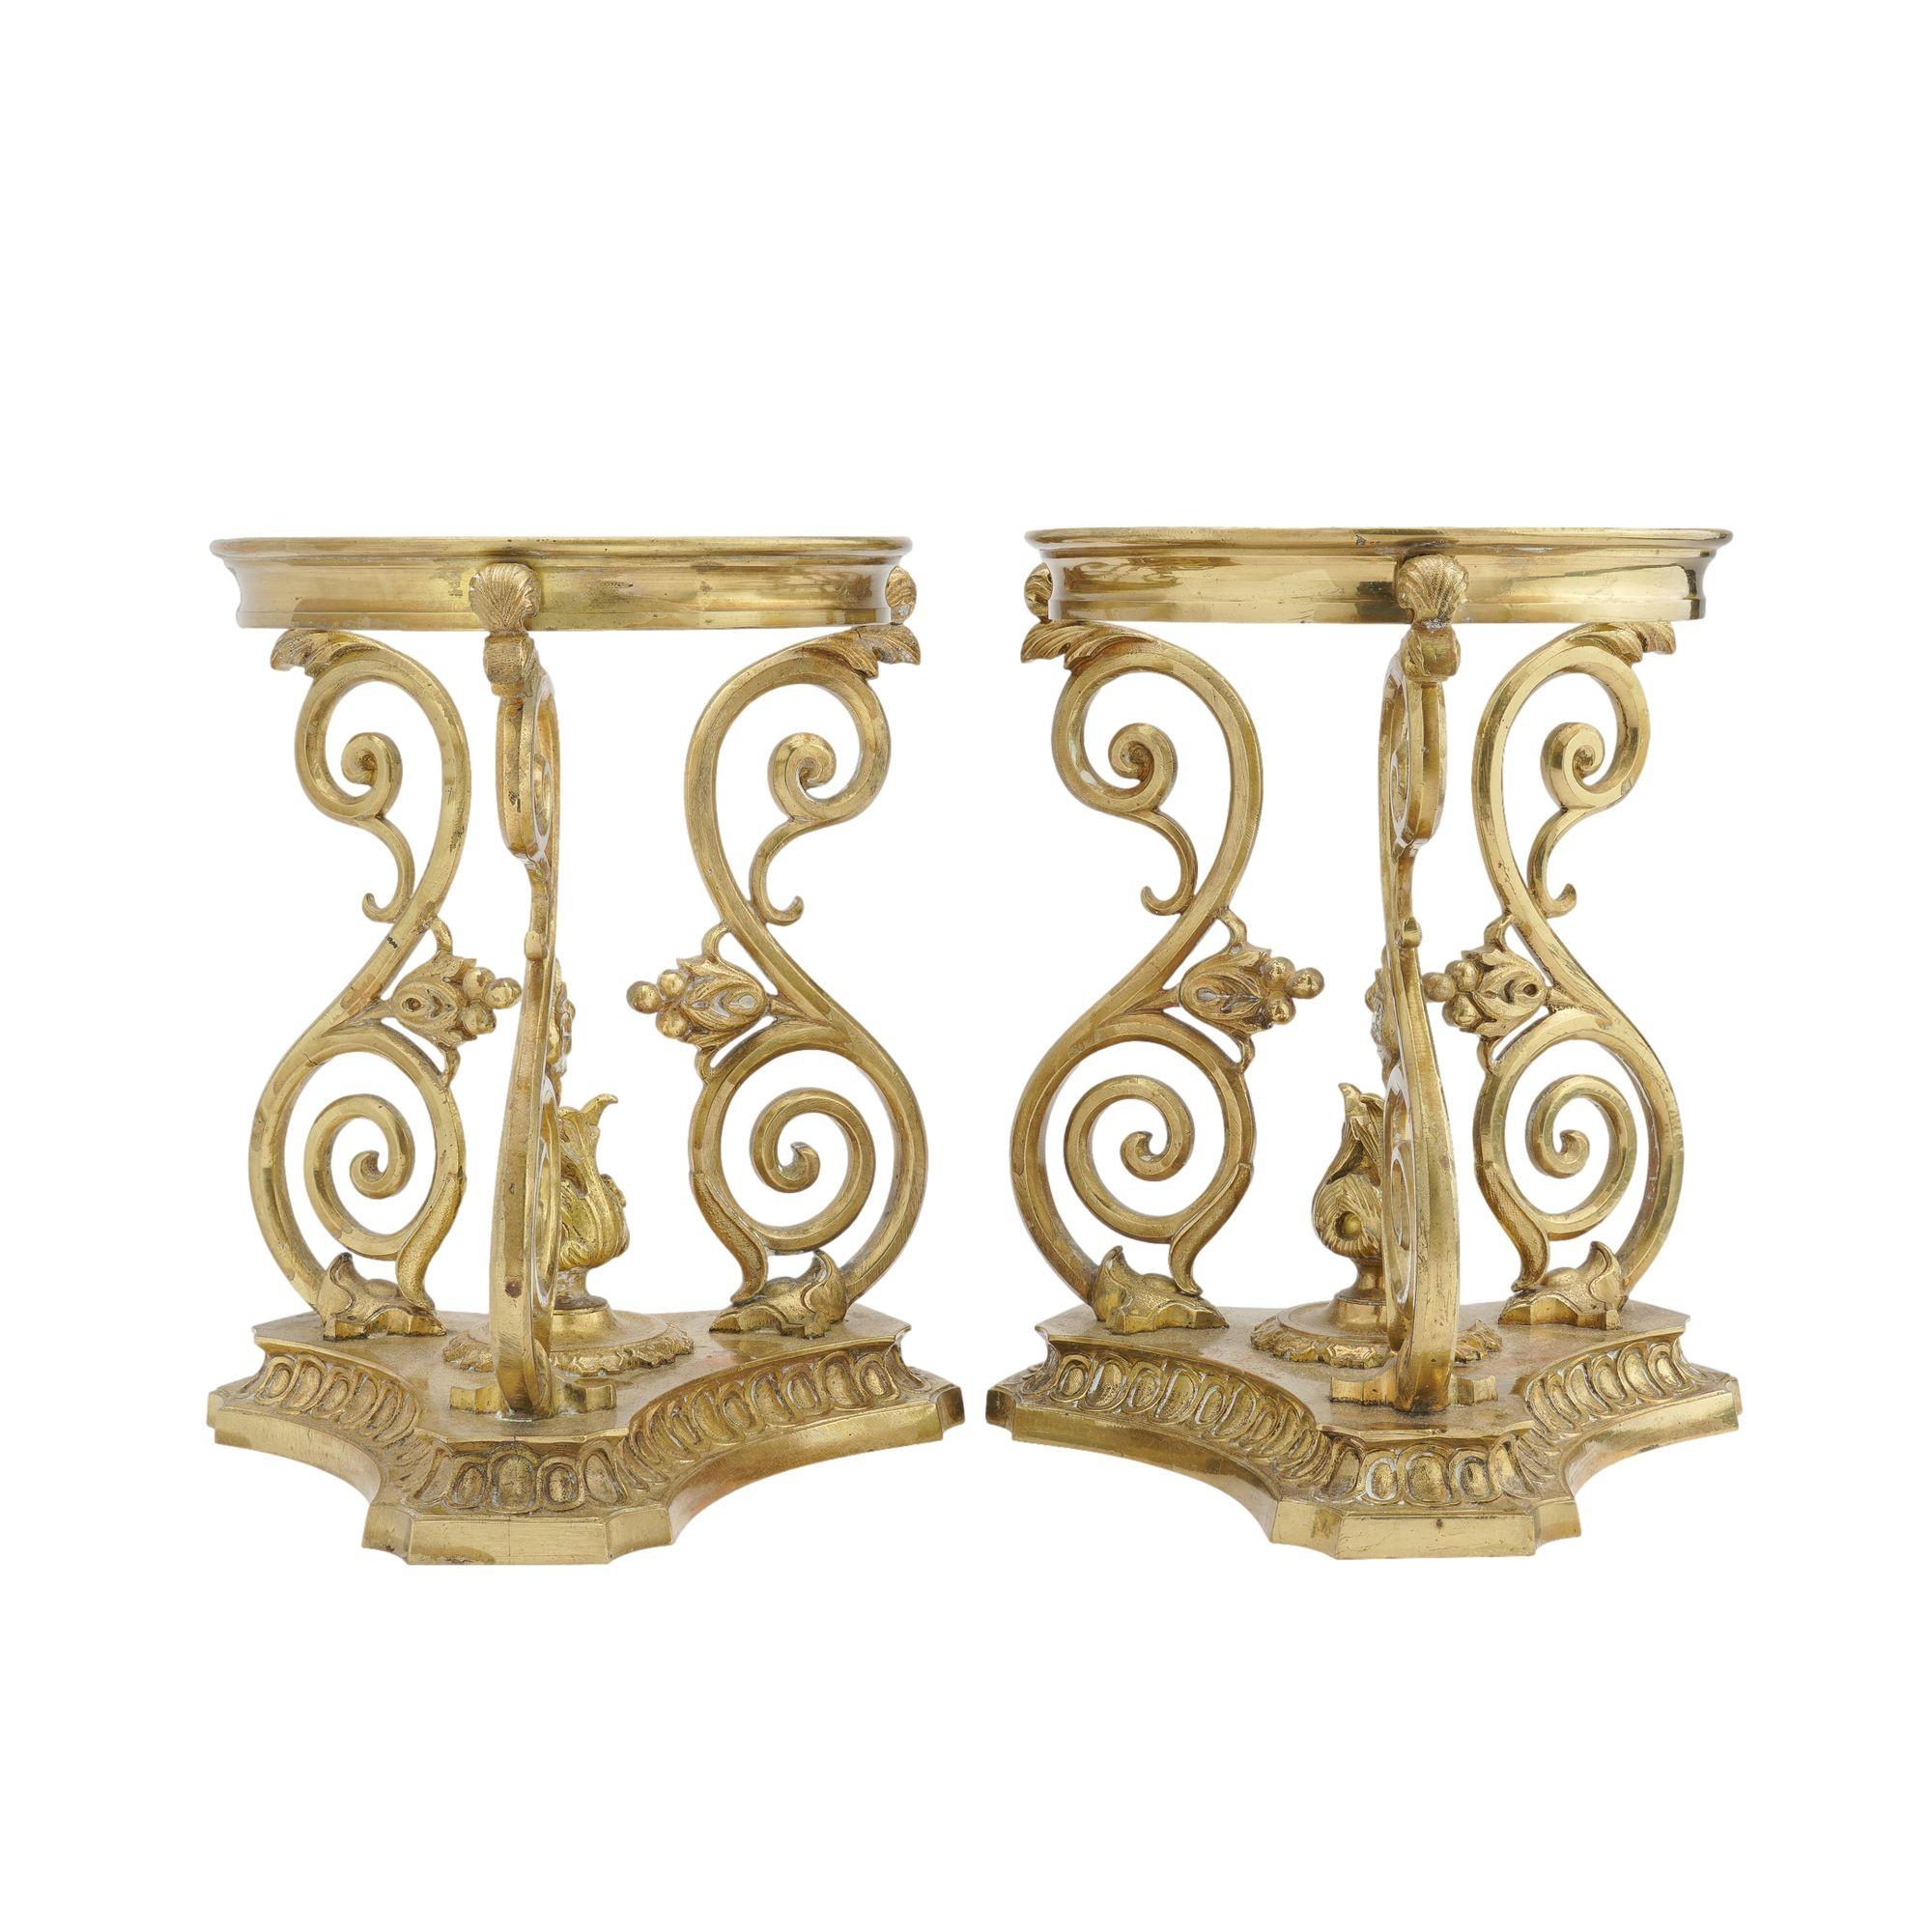 Pair of cast brass meridian oil lamp stands.
France, circa 1850.